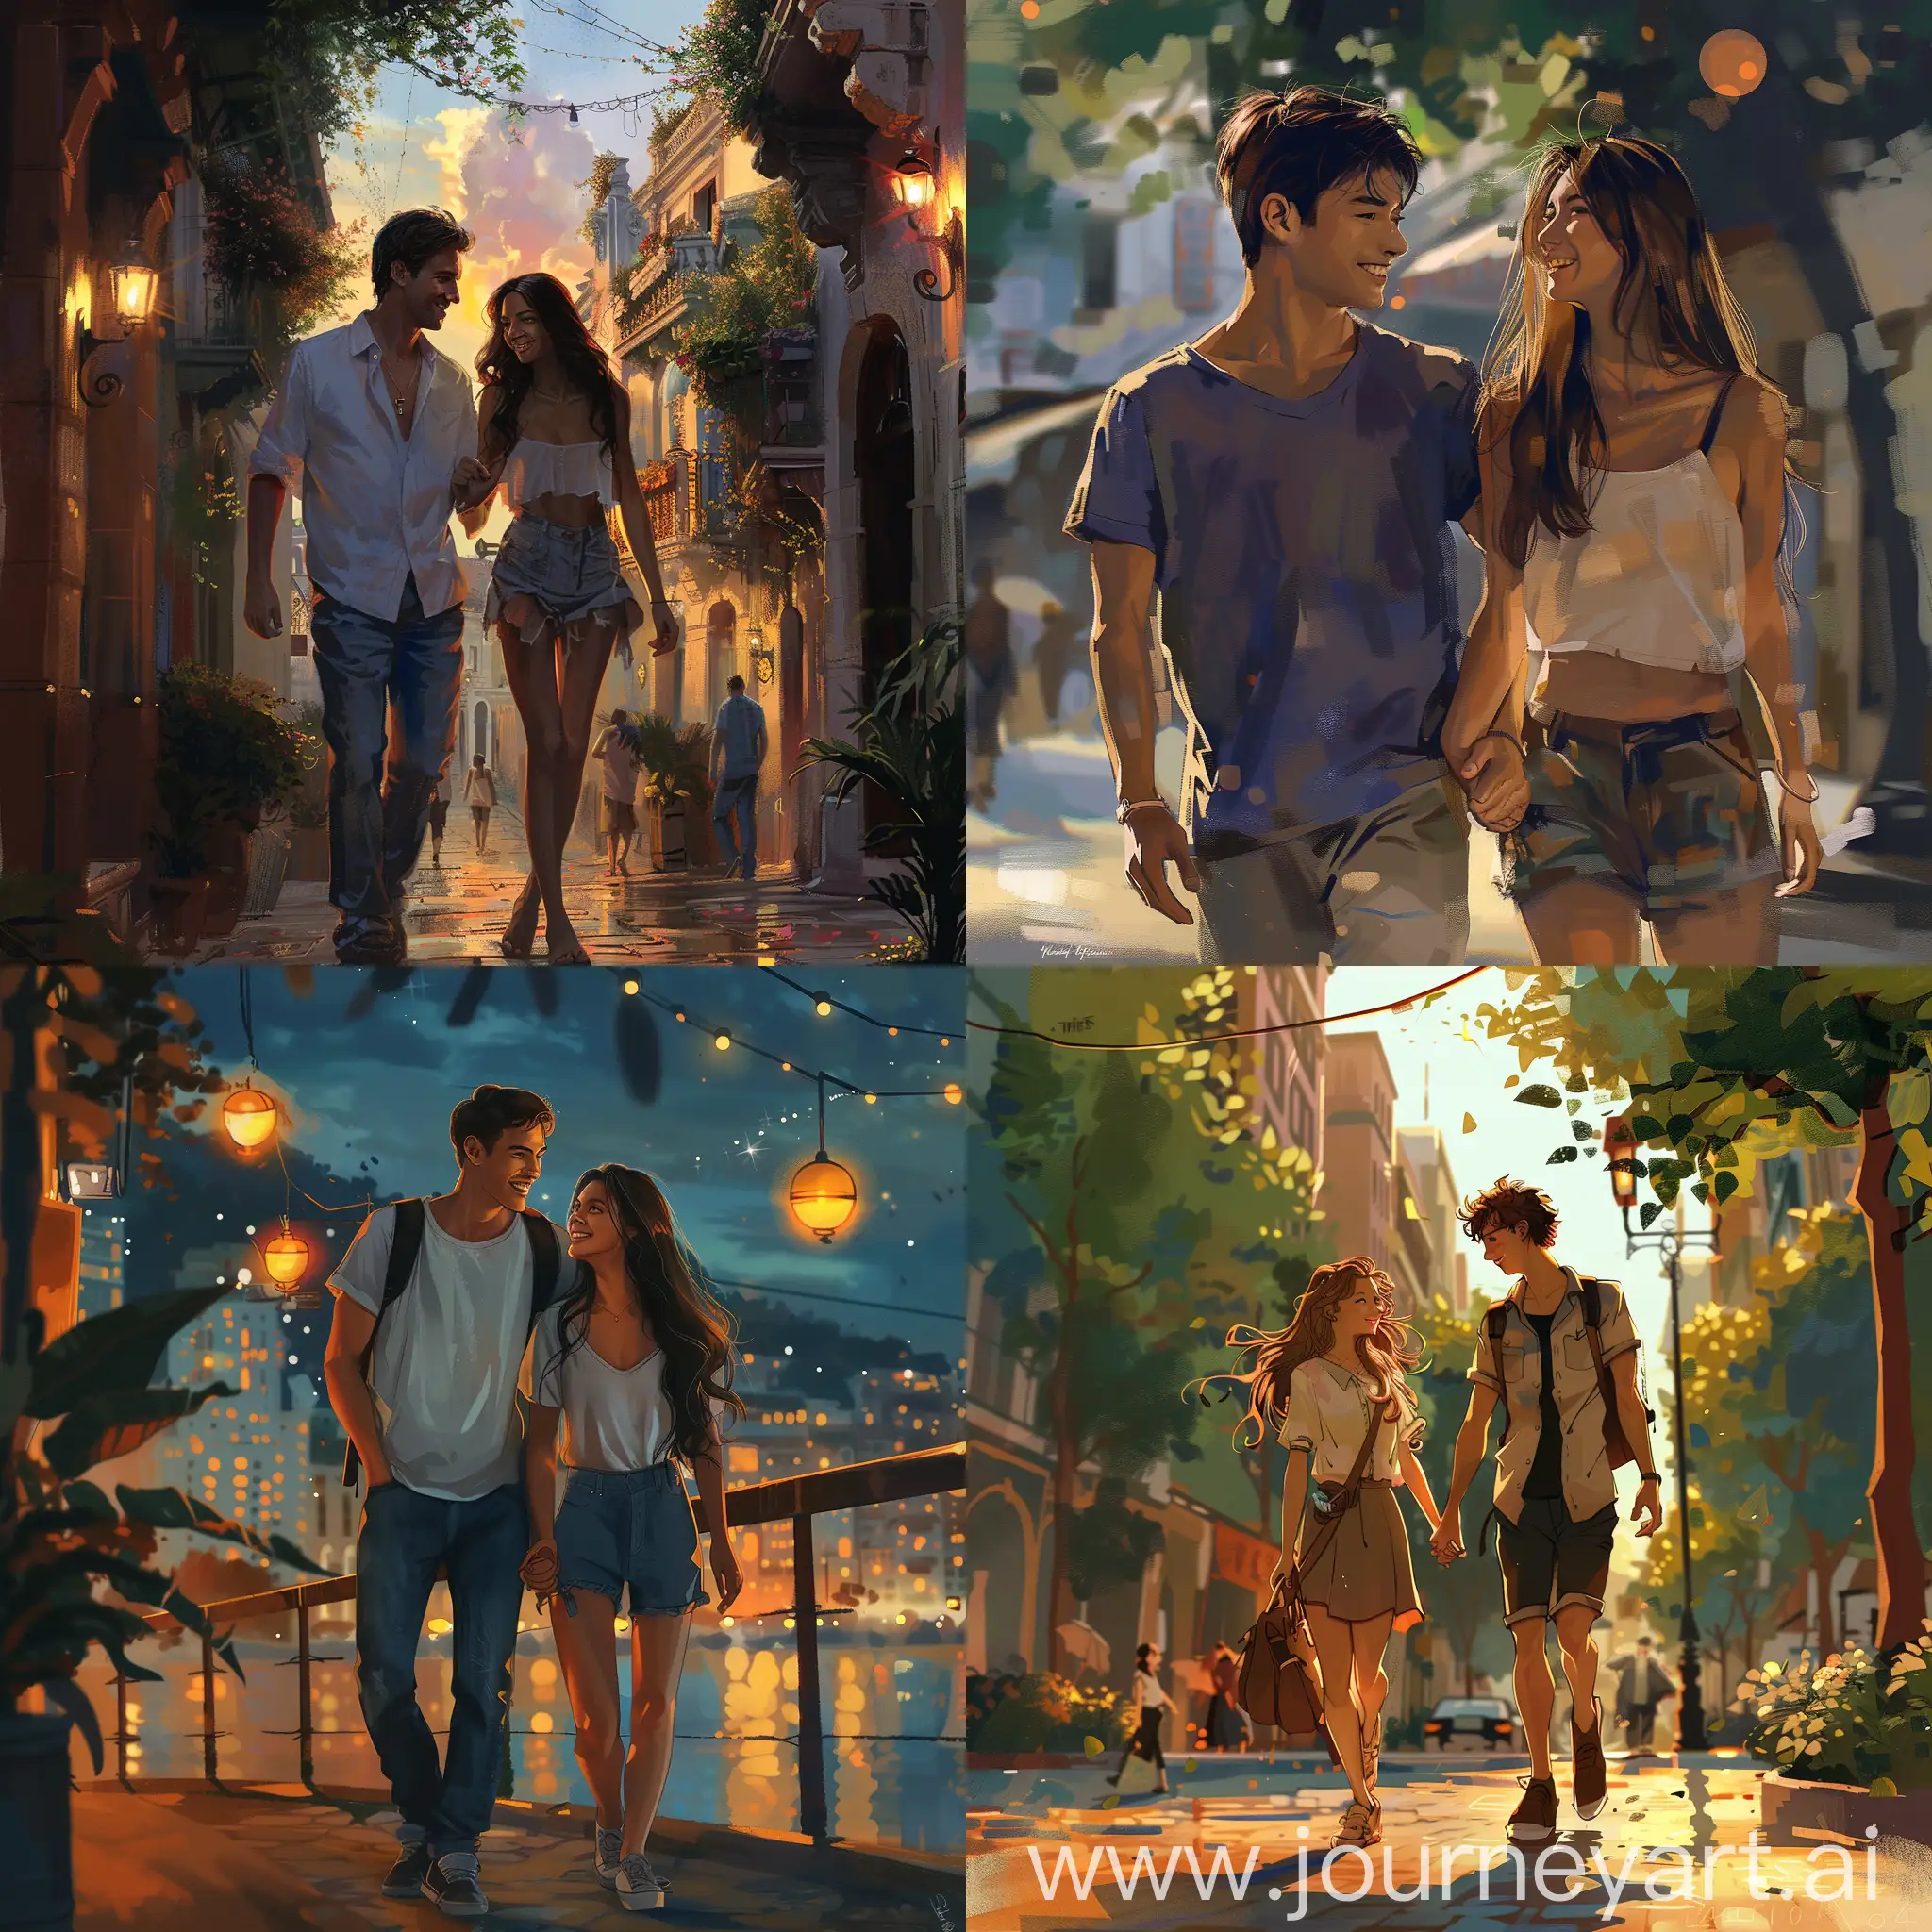 Couple-Walking-Together-in-a-Summer-City-Evening